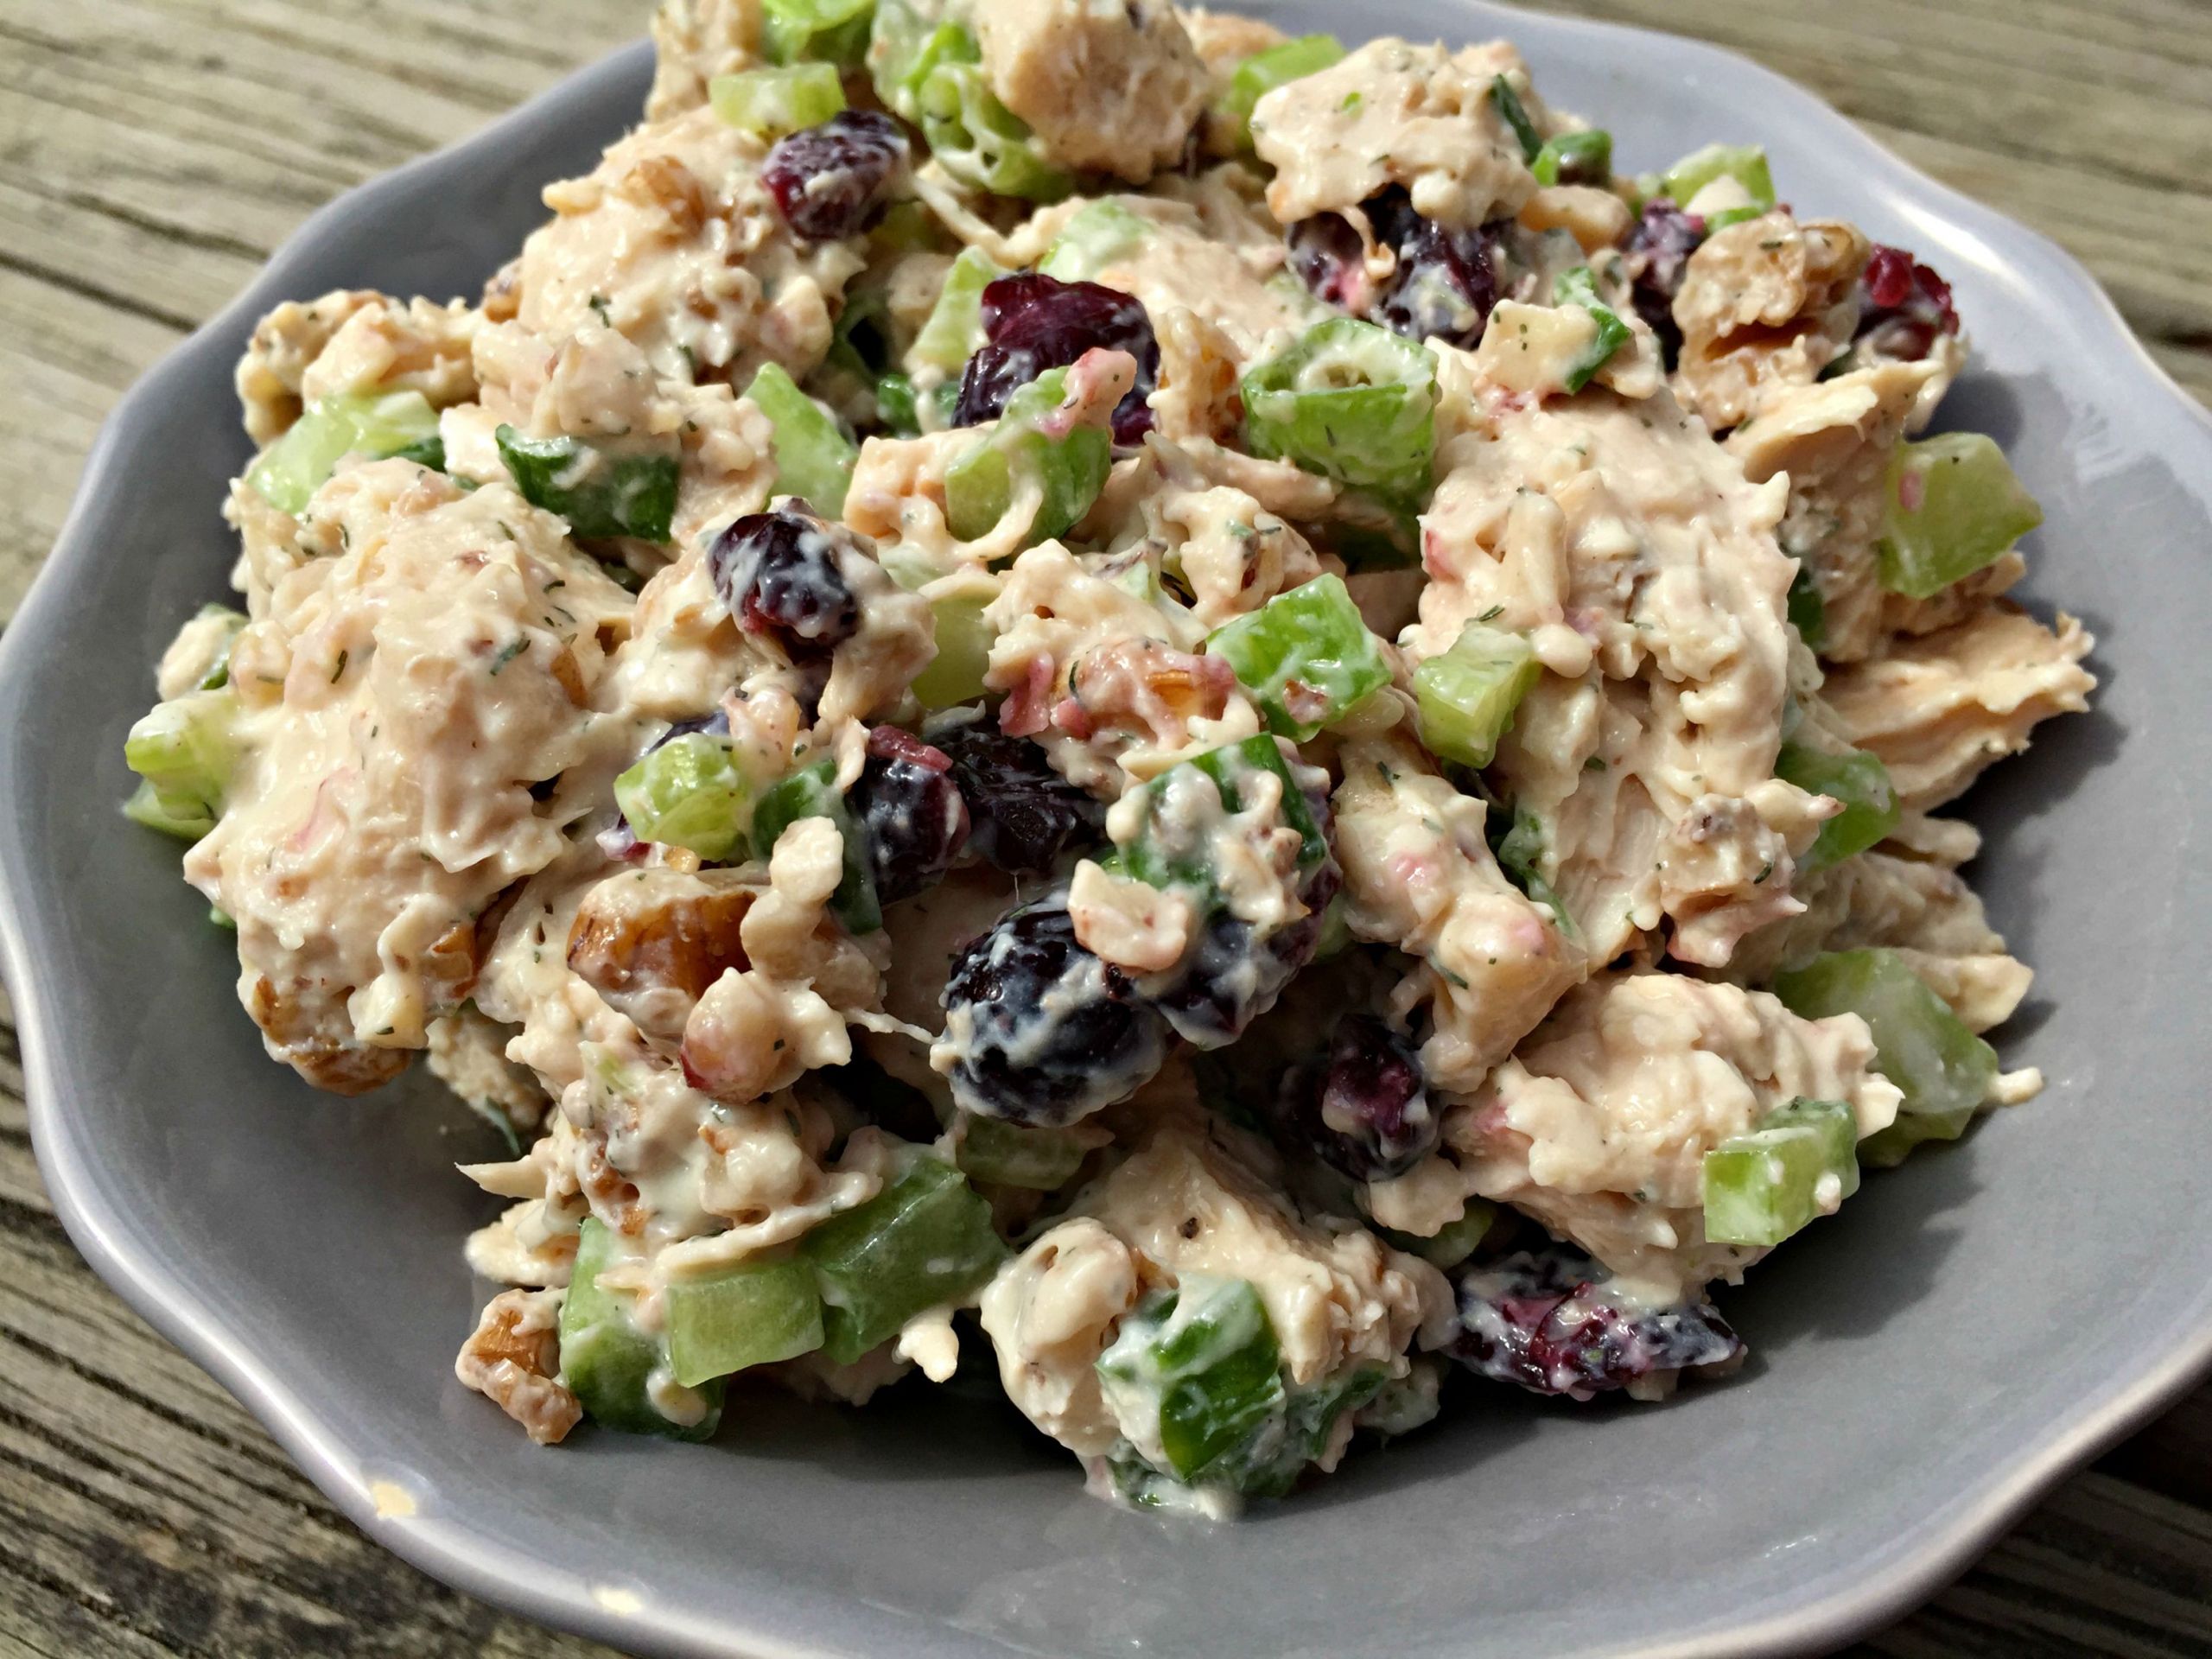 Chicken Salad Recipe With Cranberries
 Chicken Salad with Dried Cranberries and Walnuts